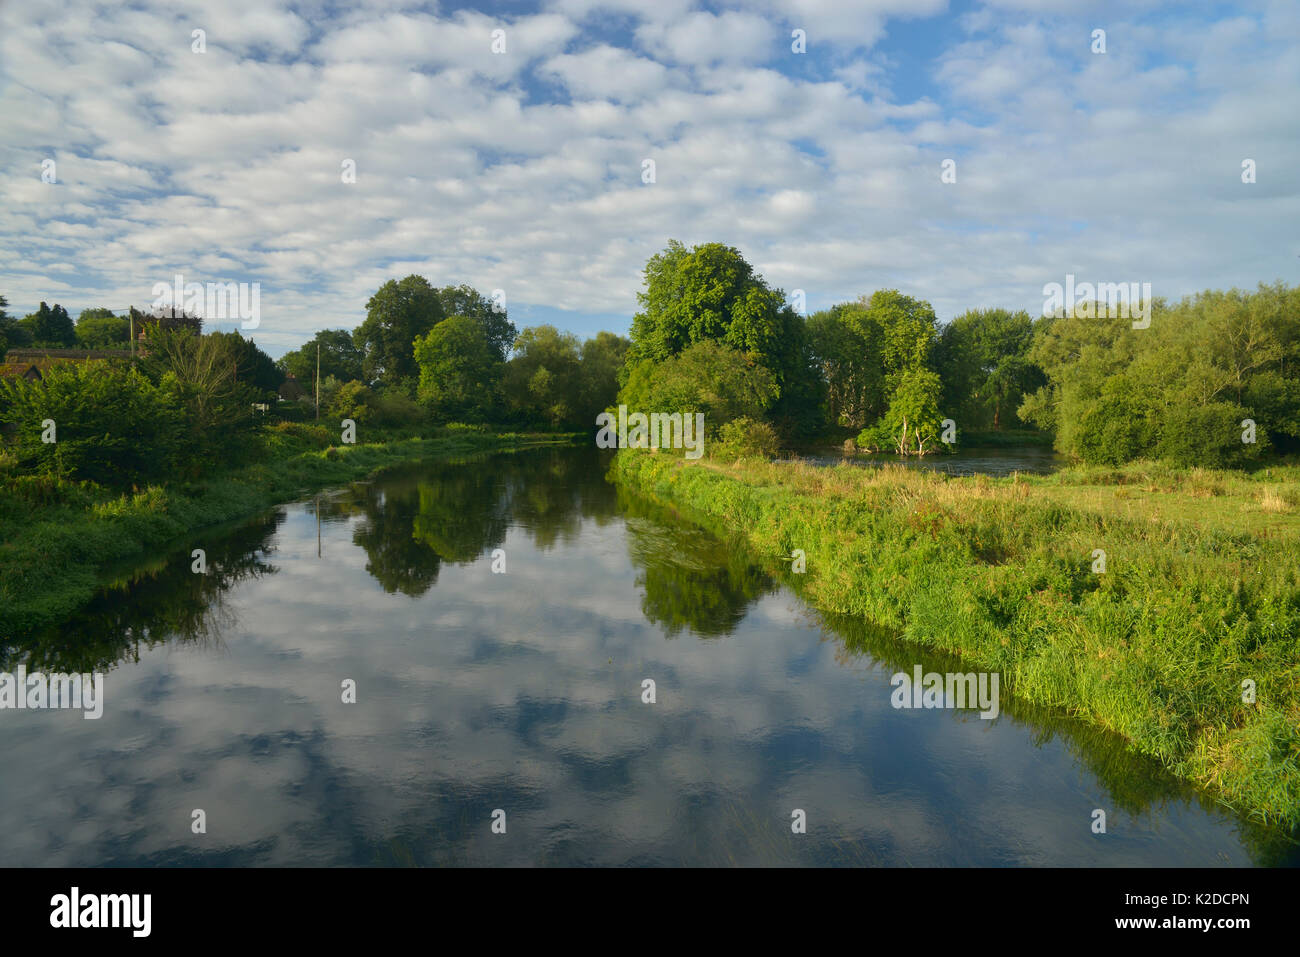 River Avon in Ibsley near Ringwood in Dorset on Hampshire Borders, England, UK. August 2013. Stock Photo